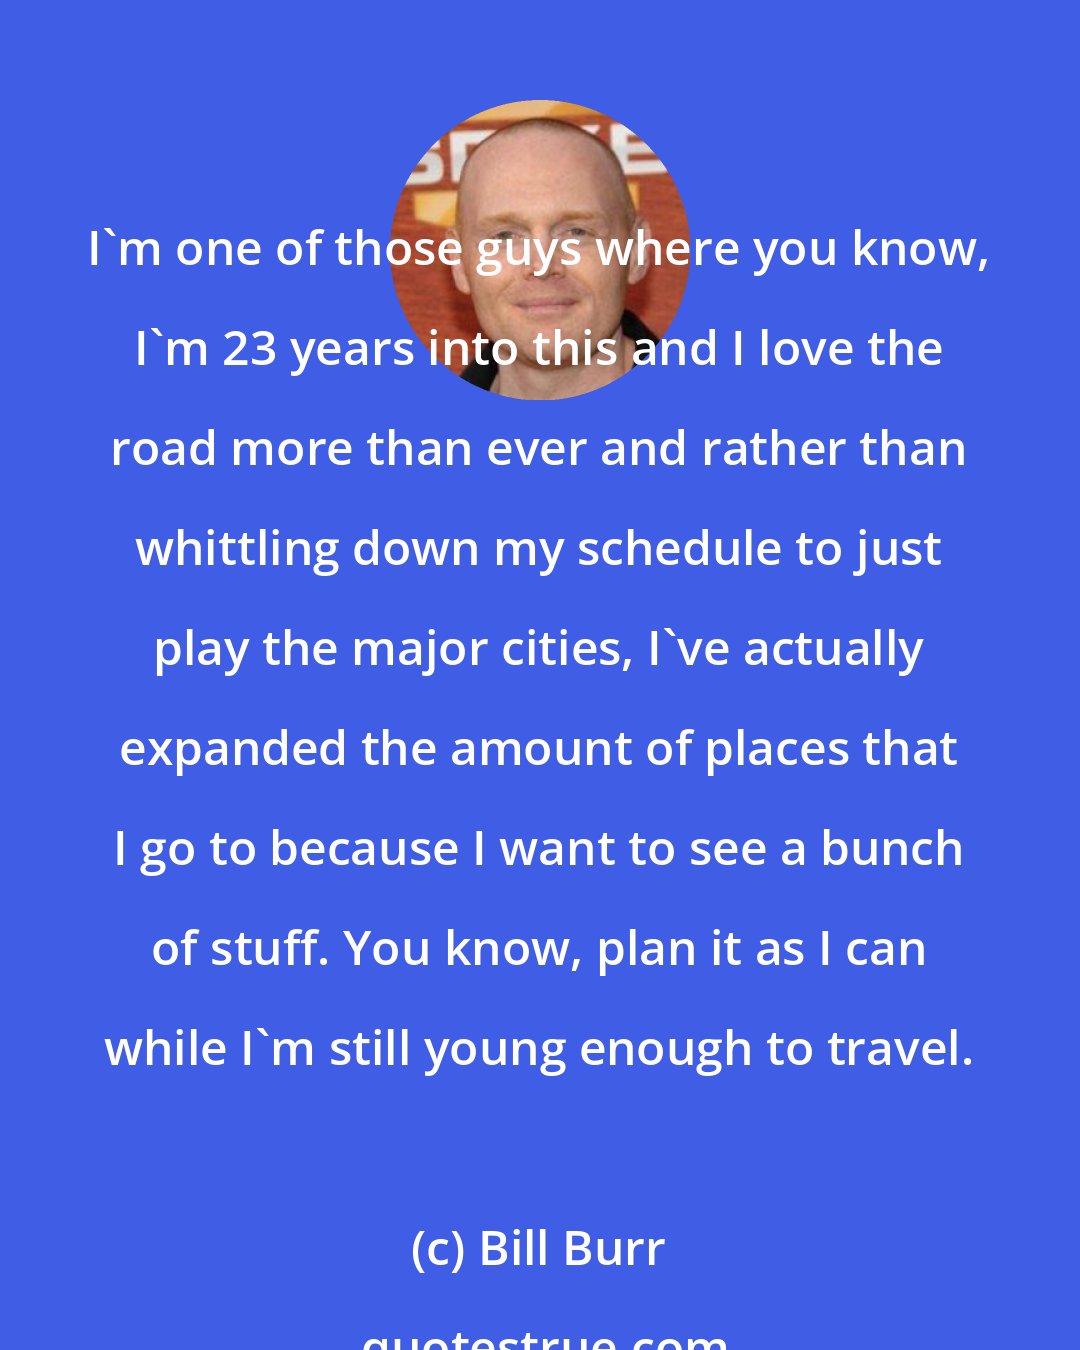 Bill Burr: I'm one of those guys where you know, I'm 23 years into this and I love the road more than ever and rather than whittling down my schedule to just play the major cities, I've actually expanded the amount of places that I go to because I want to see a bunch of stuff. You know, plan it as I can while I'm still young enough to travel.